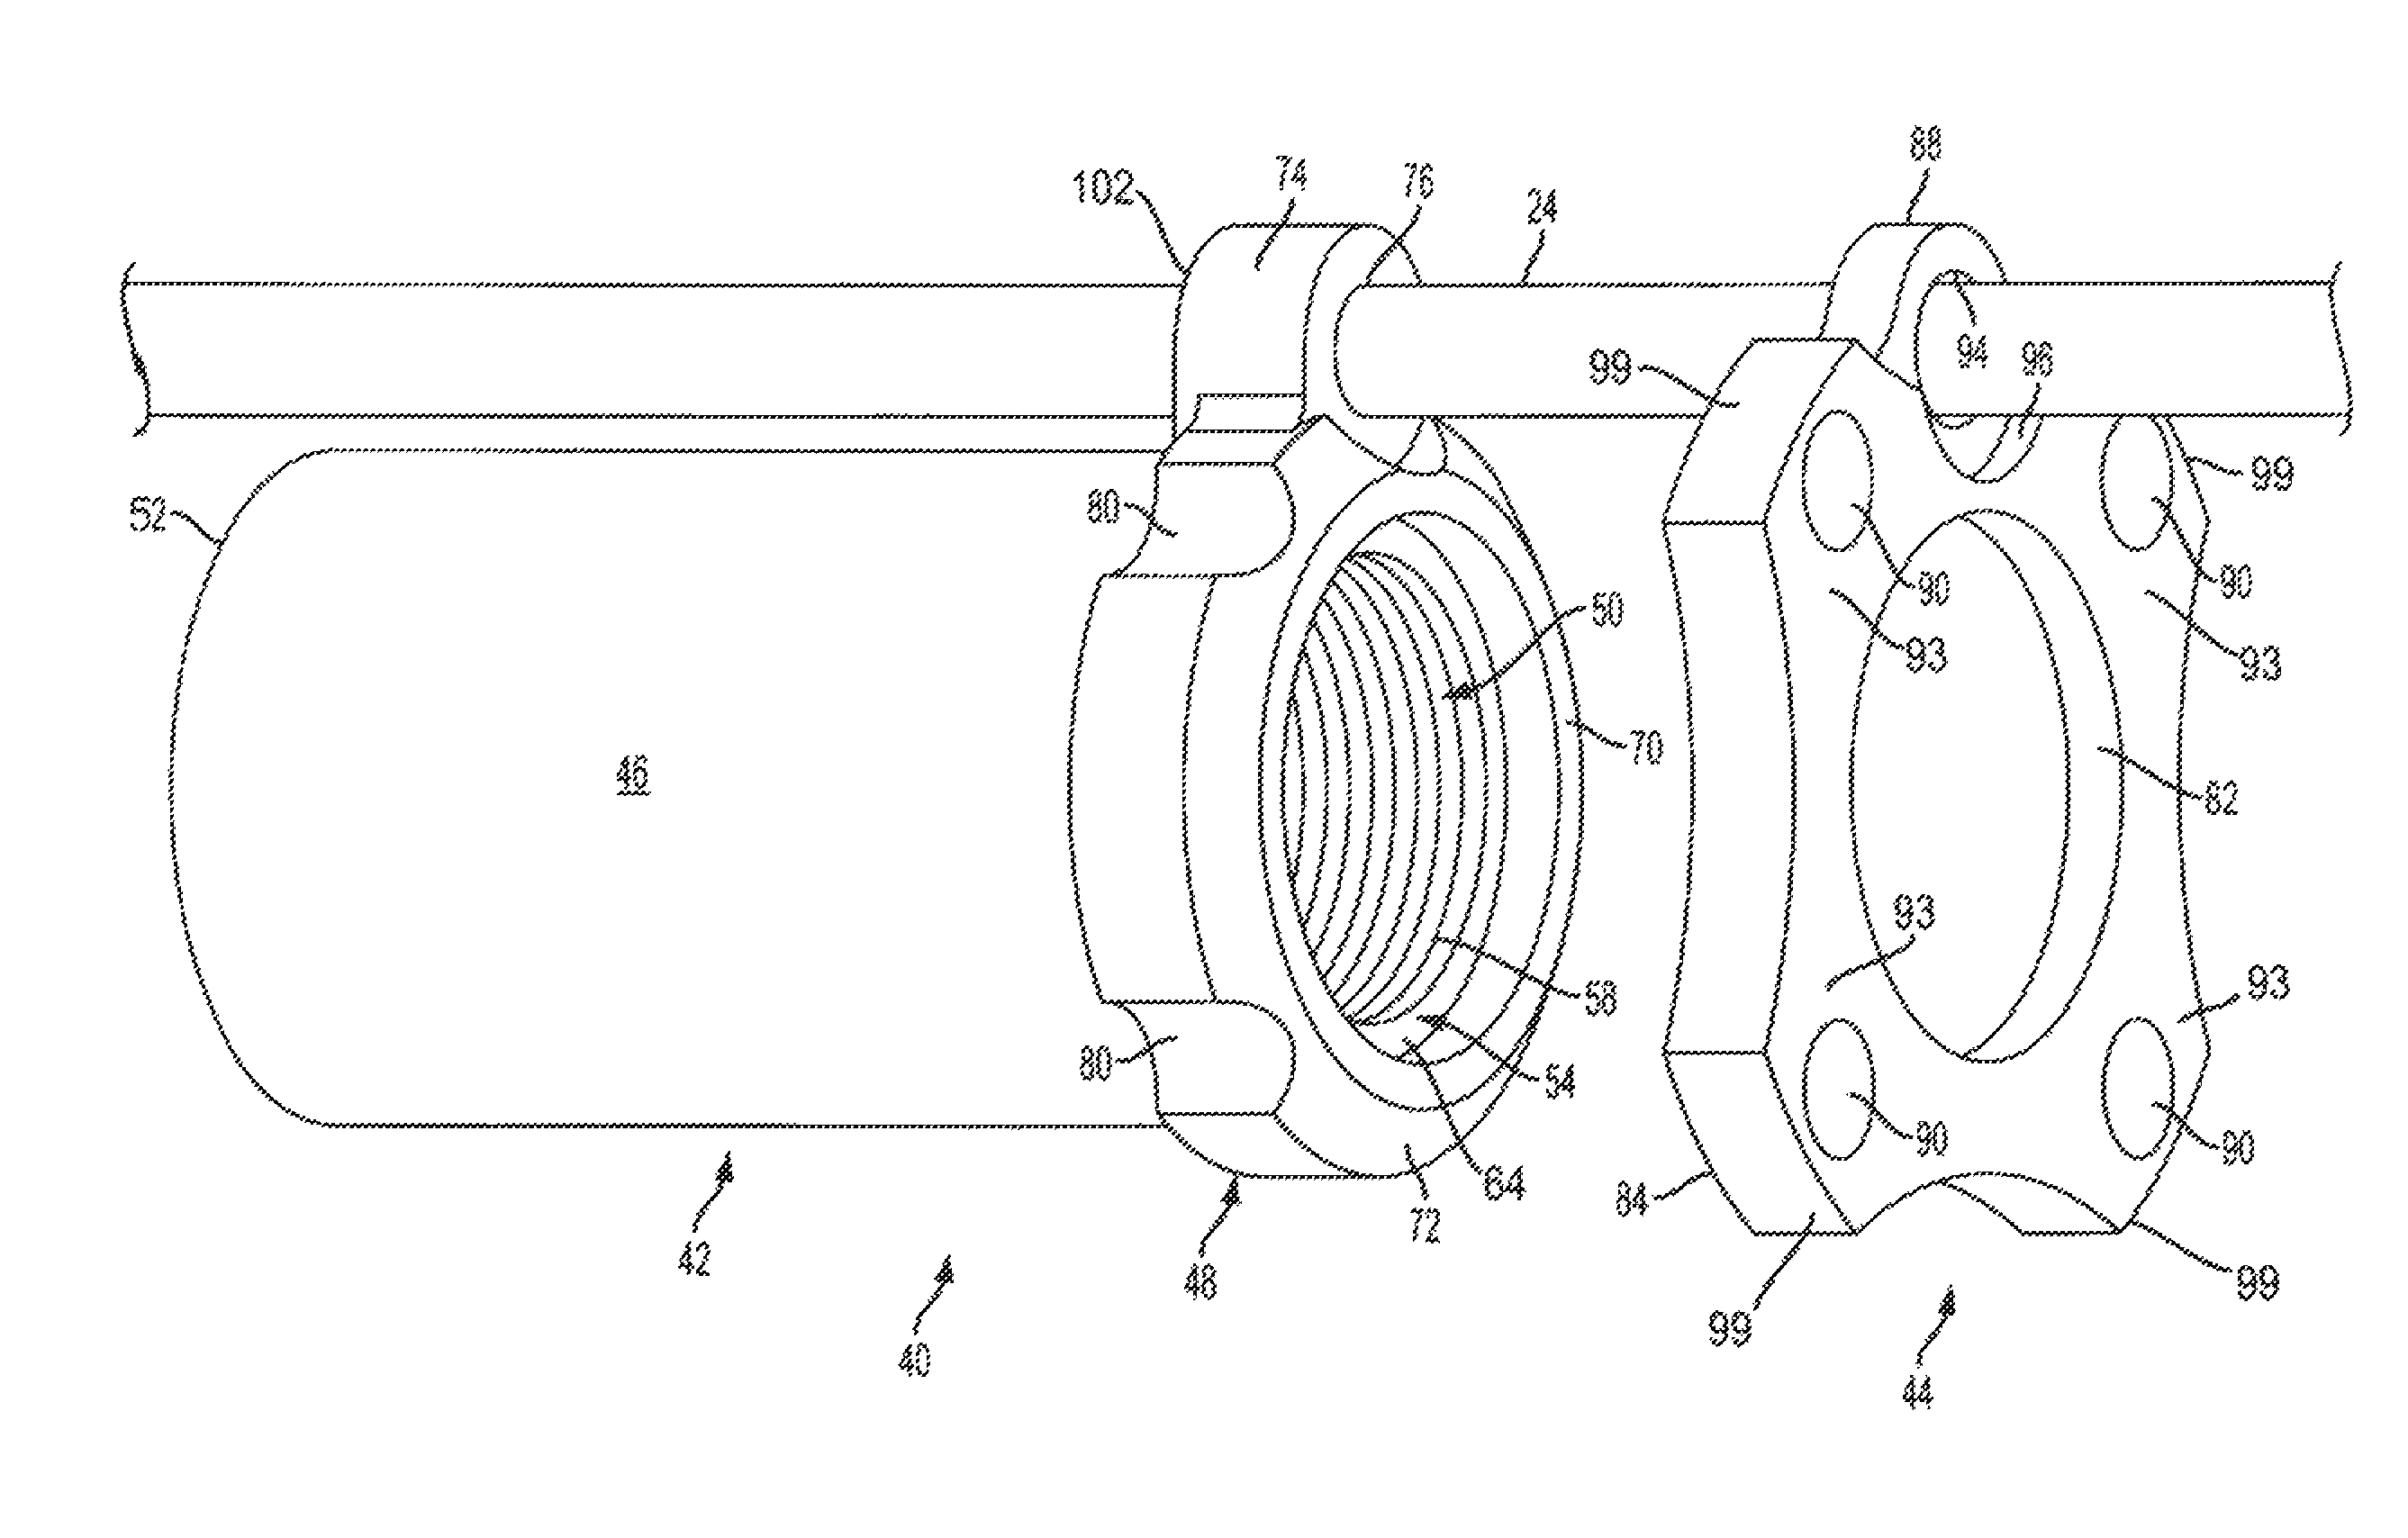 Barrel mounting and retention mechanism